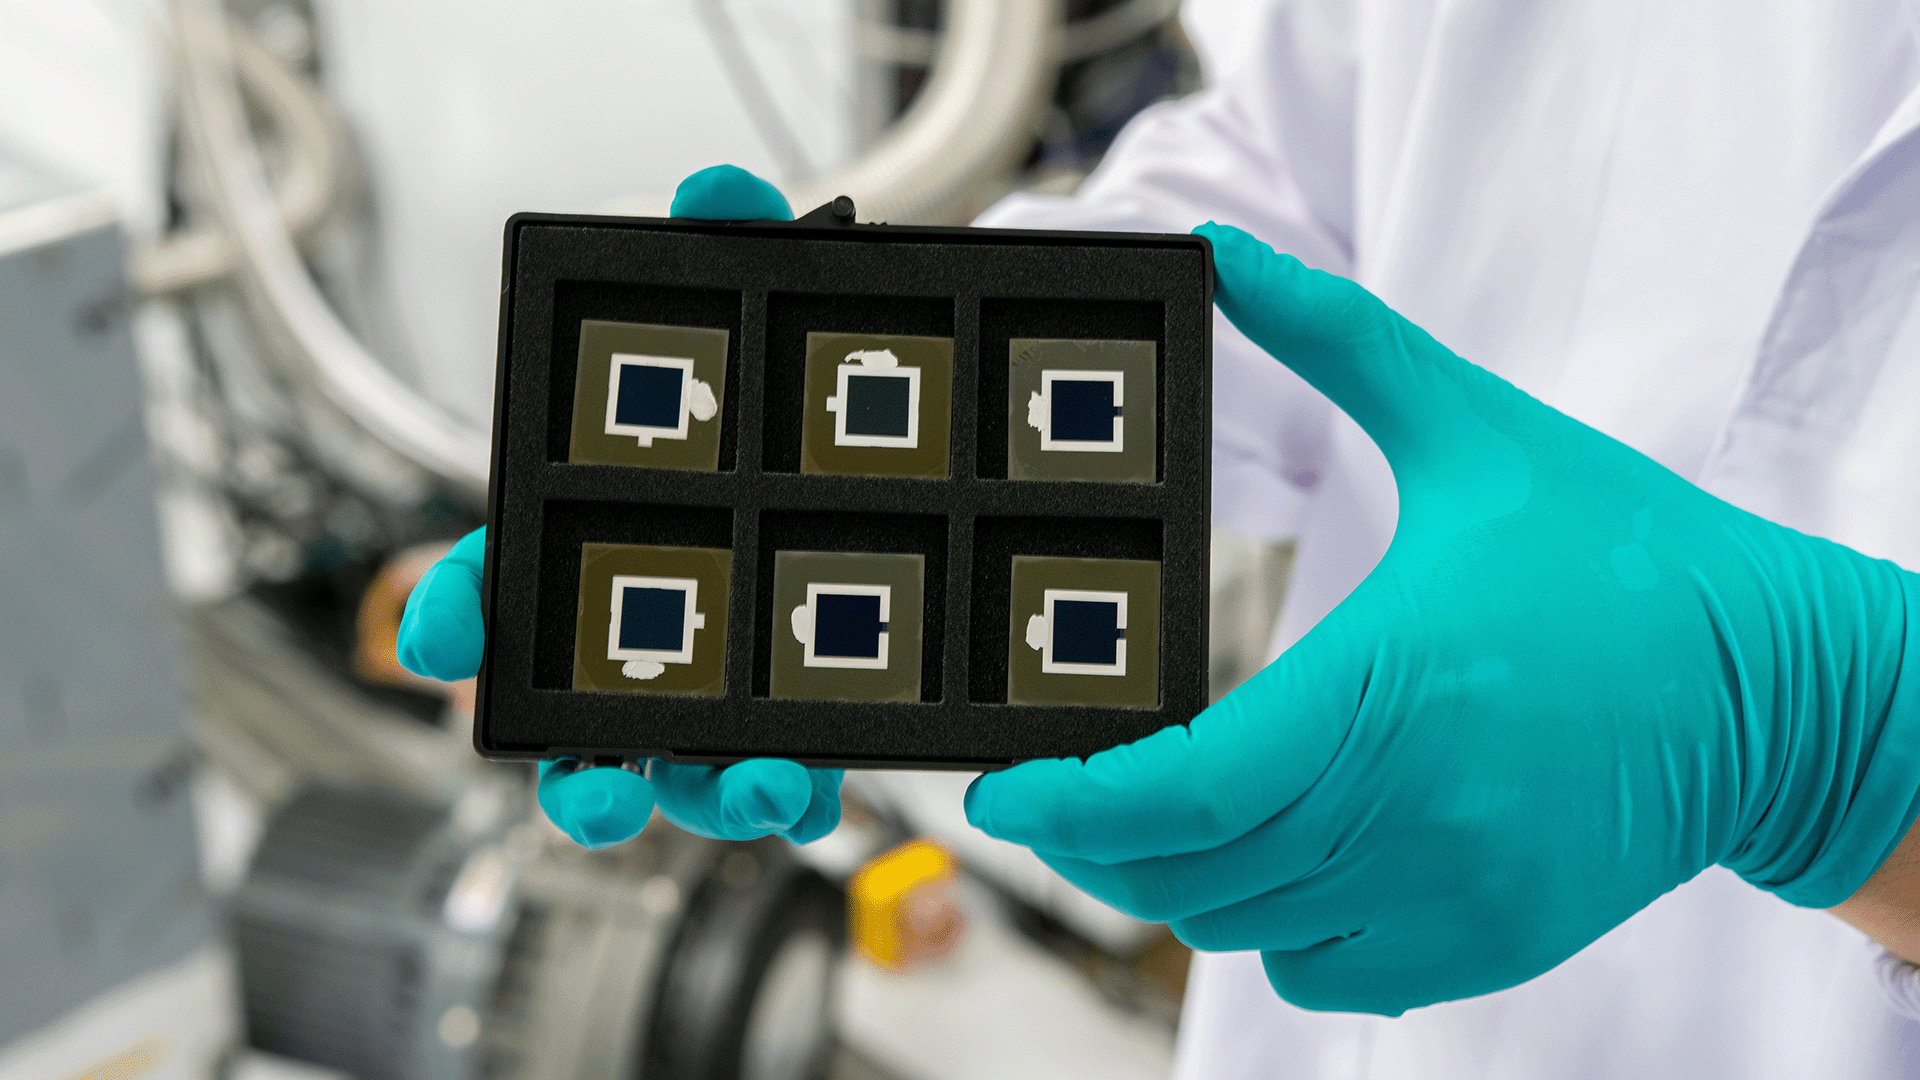 Integrating a new anion, cyanate, into a perovskite structure, was a key advance in fabricating new triple-junction perovskite/Si tandem solar cells.